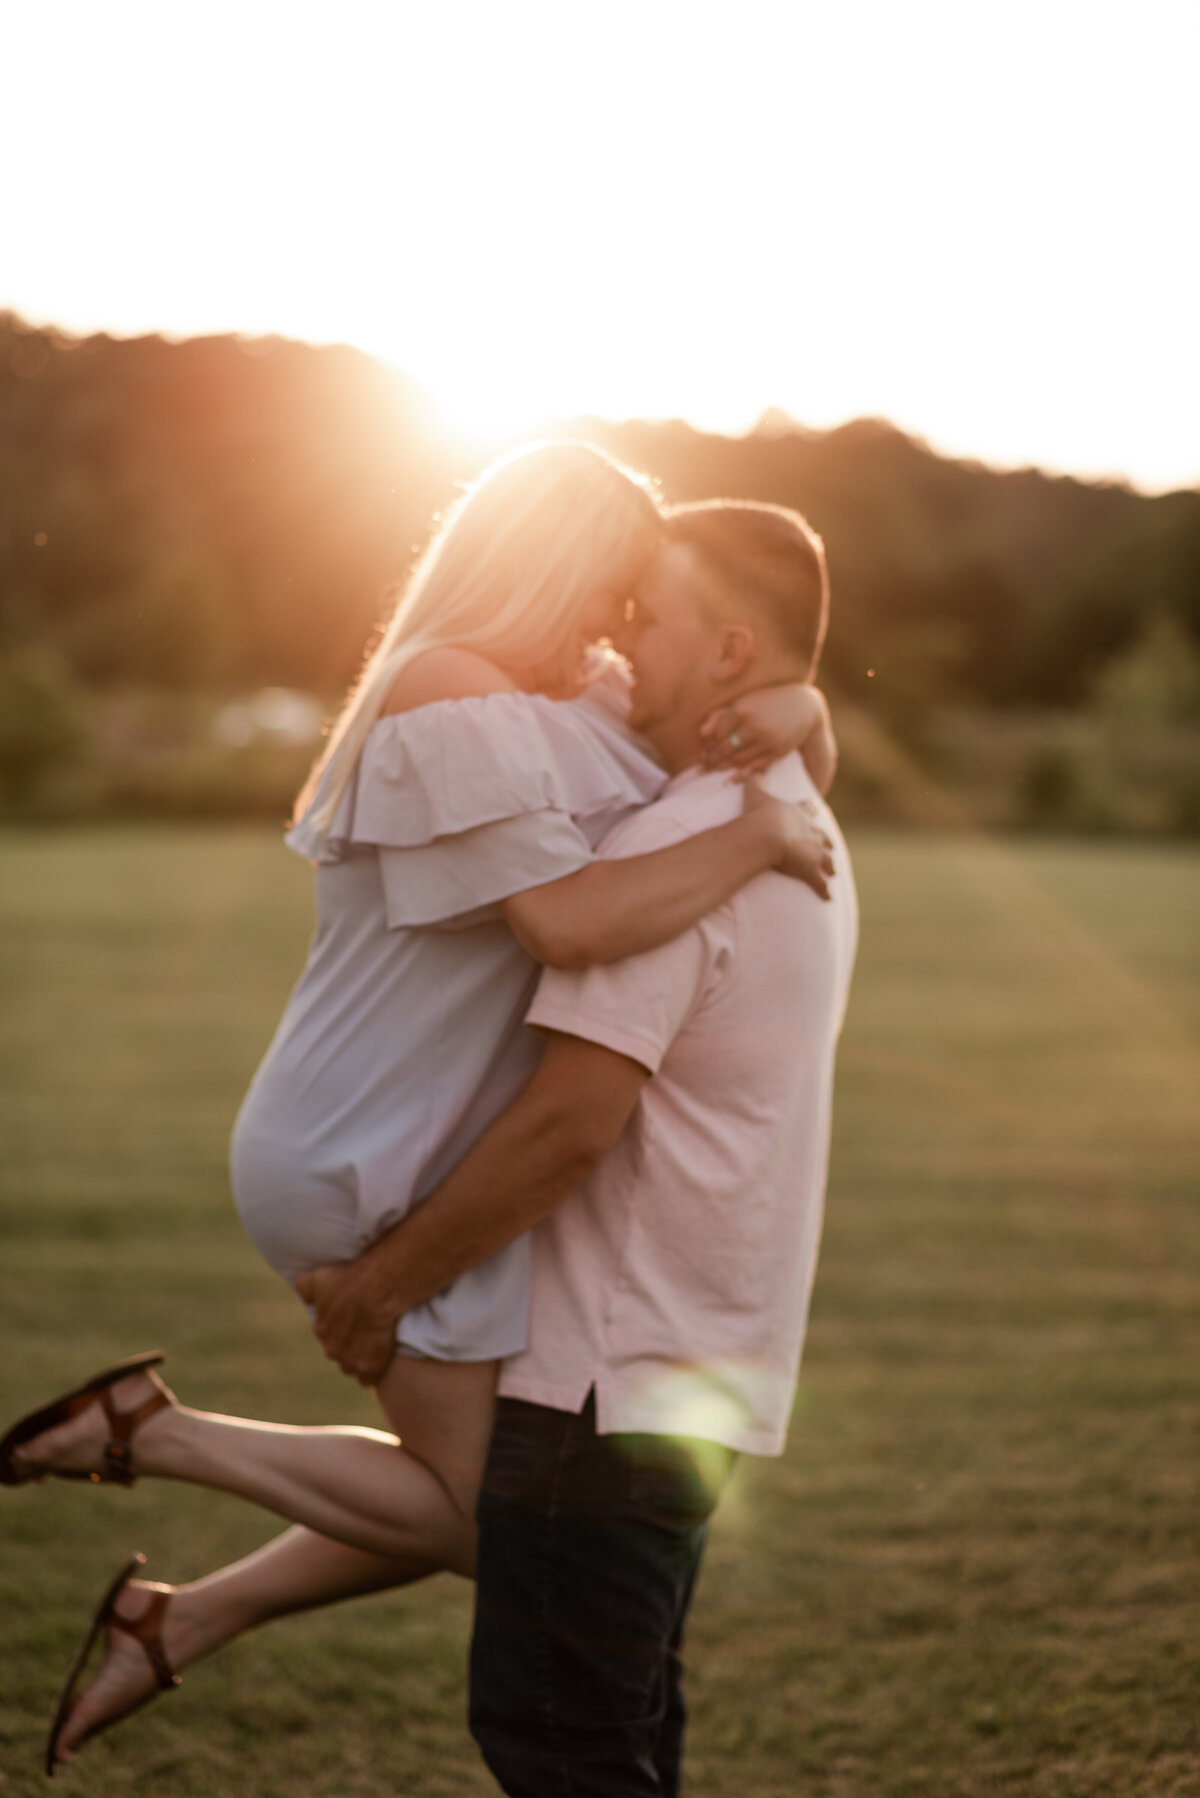 Couple Intimate at Sunset taken by Michelle Lynn Photography located near Louisville, Kentucky